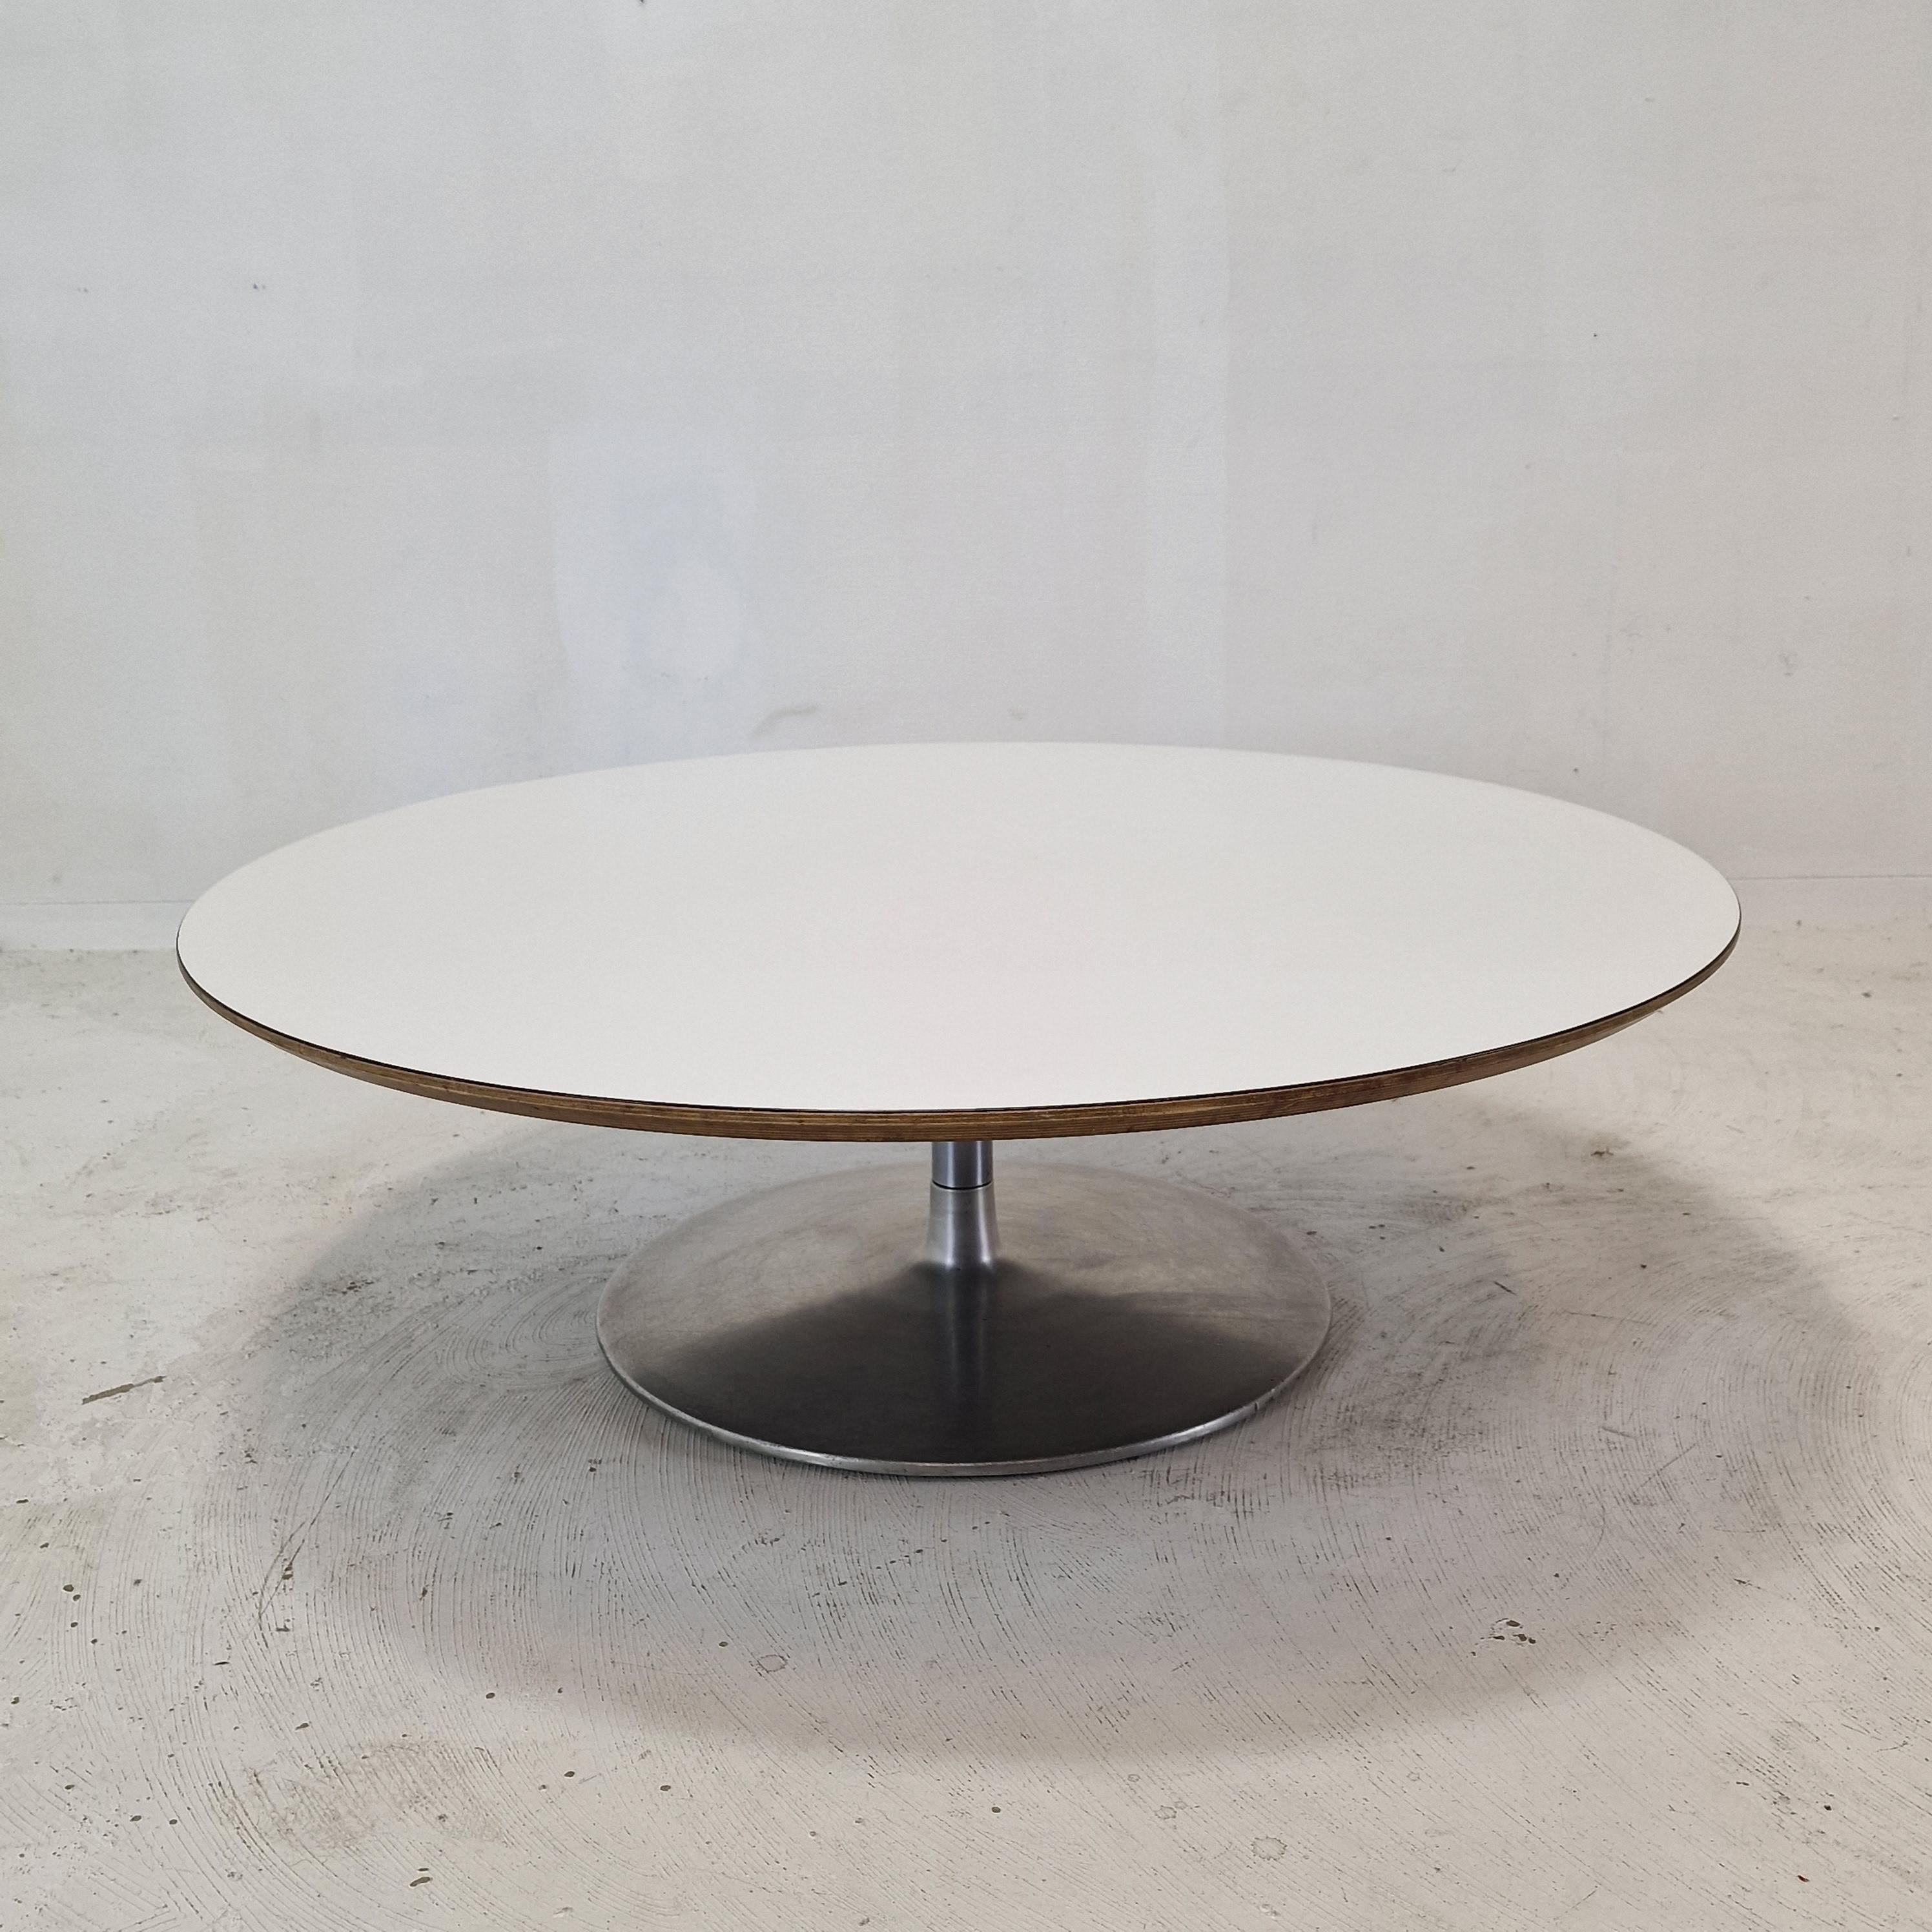 Very nice round coffee table, designed by Pierre Paulin in the 1960s. 
This particular table is fabricated end 60's.

The name of the table is 